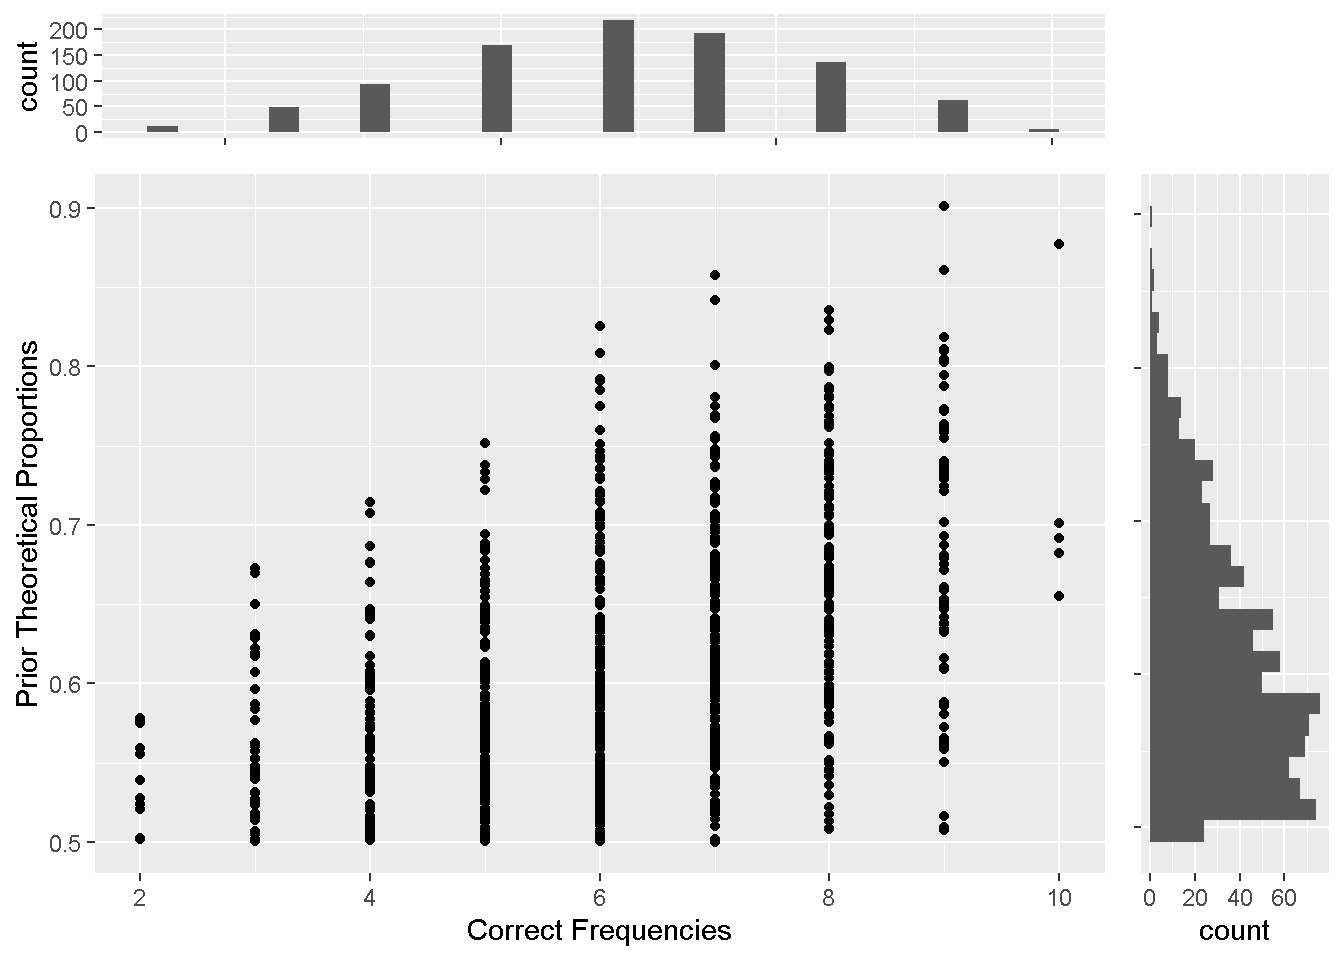 Bayesian inferece of follow-up study: Prior probability distribution (y axis) and Conditioning correct frequencies (x axis)